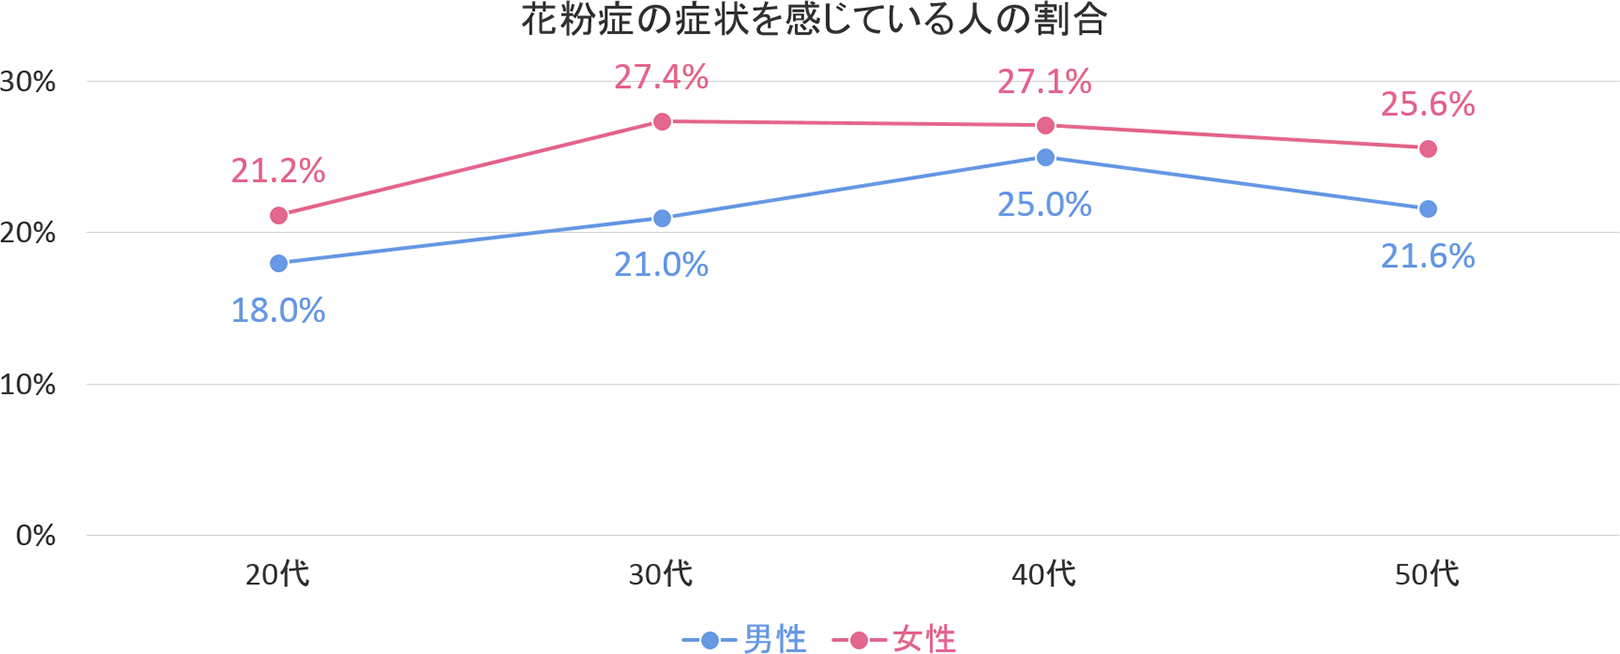 201604-02-fig-01.png